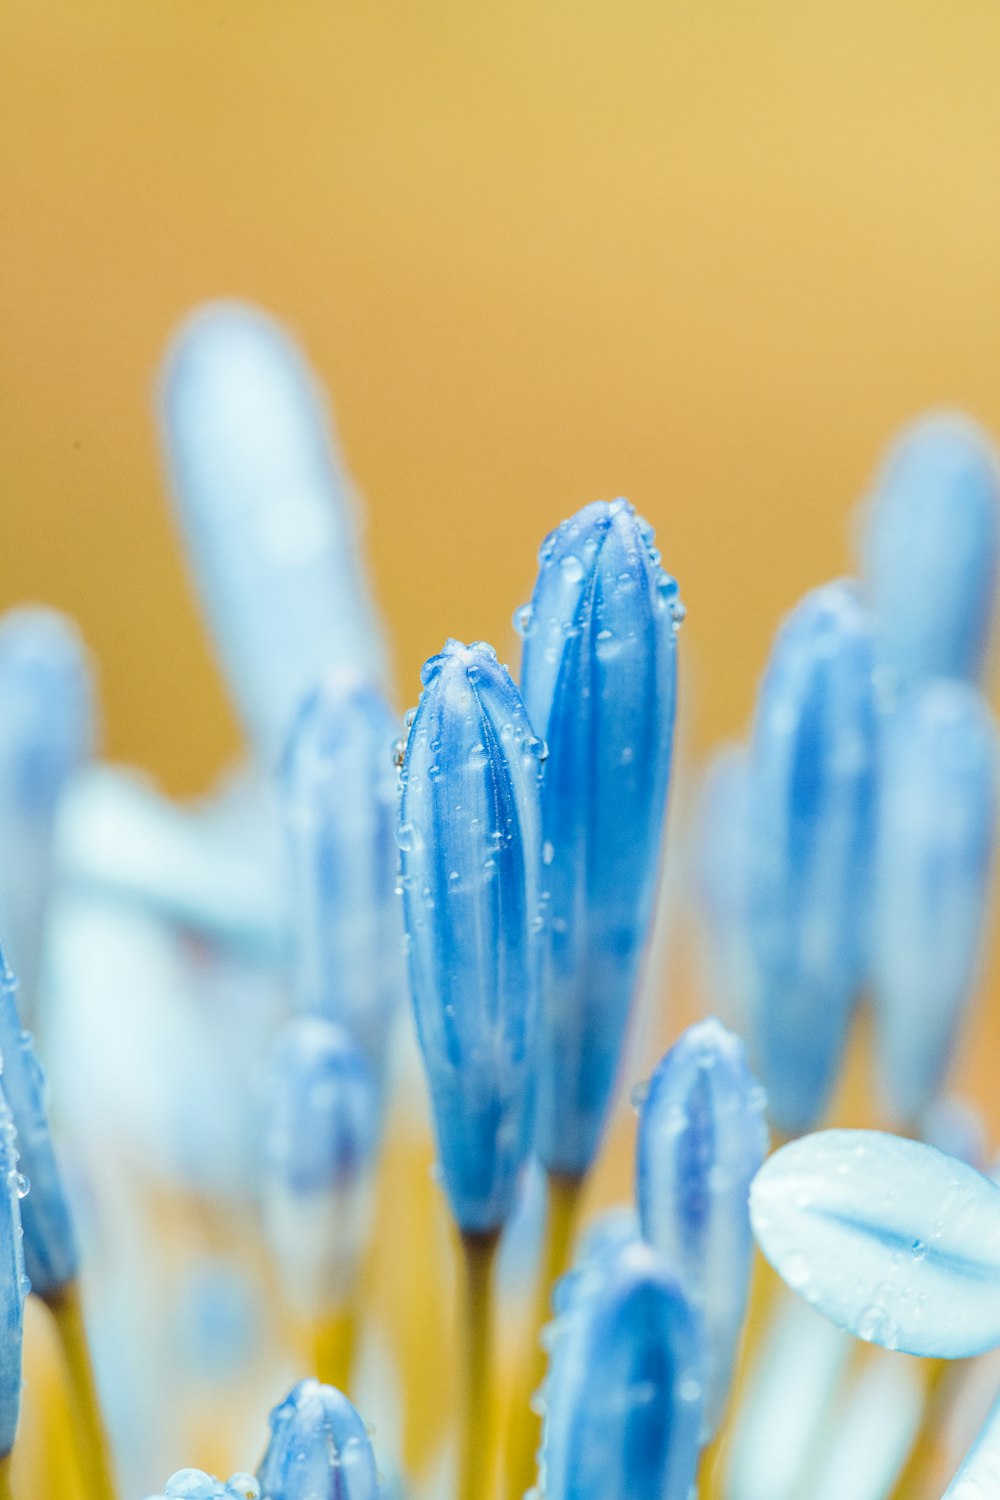 a close up of a blue flower with drops of water on it